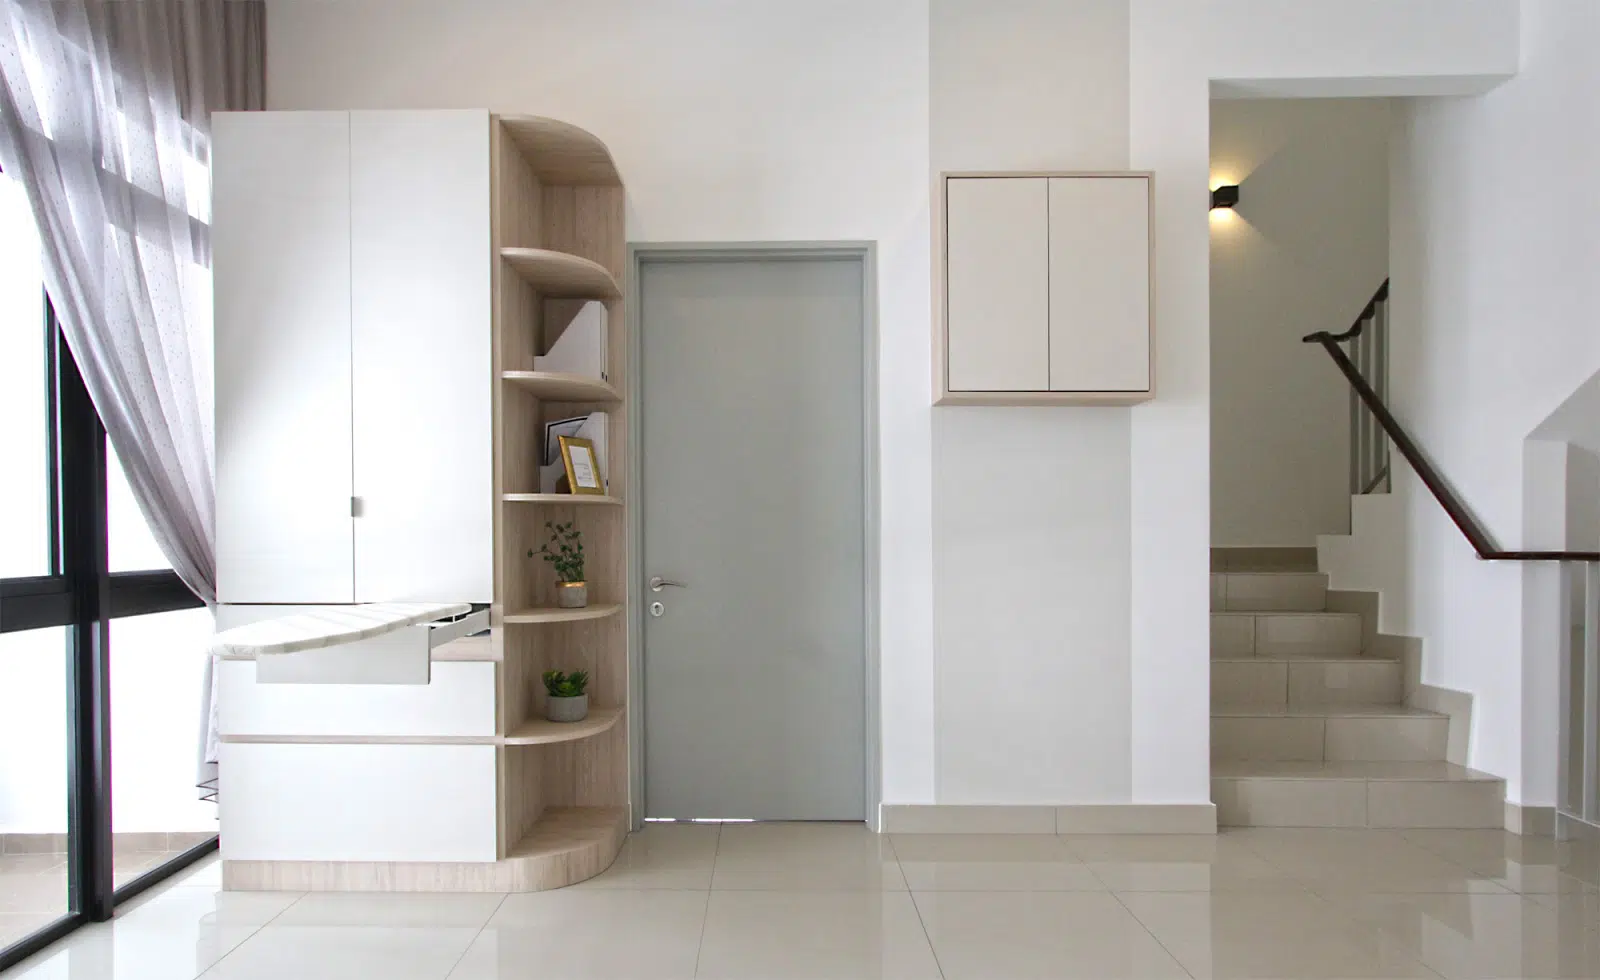 Above: A built-in ironing board with more shelves and cabinets.